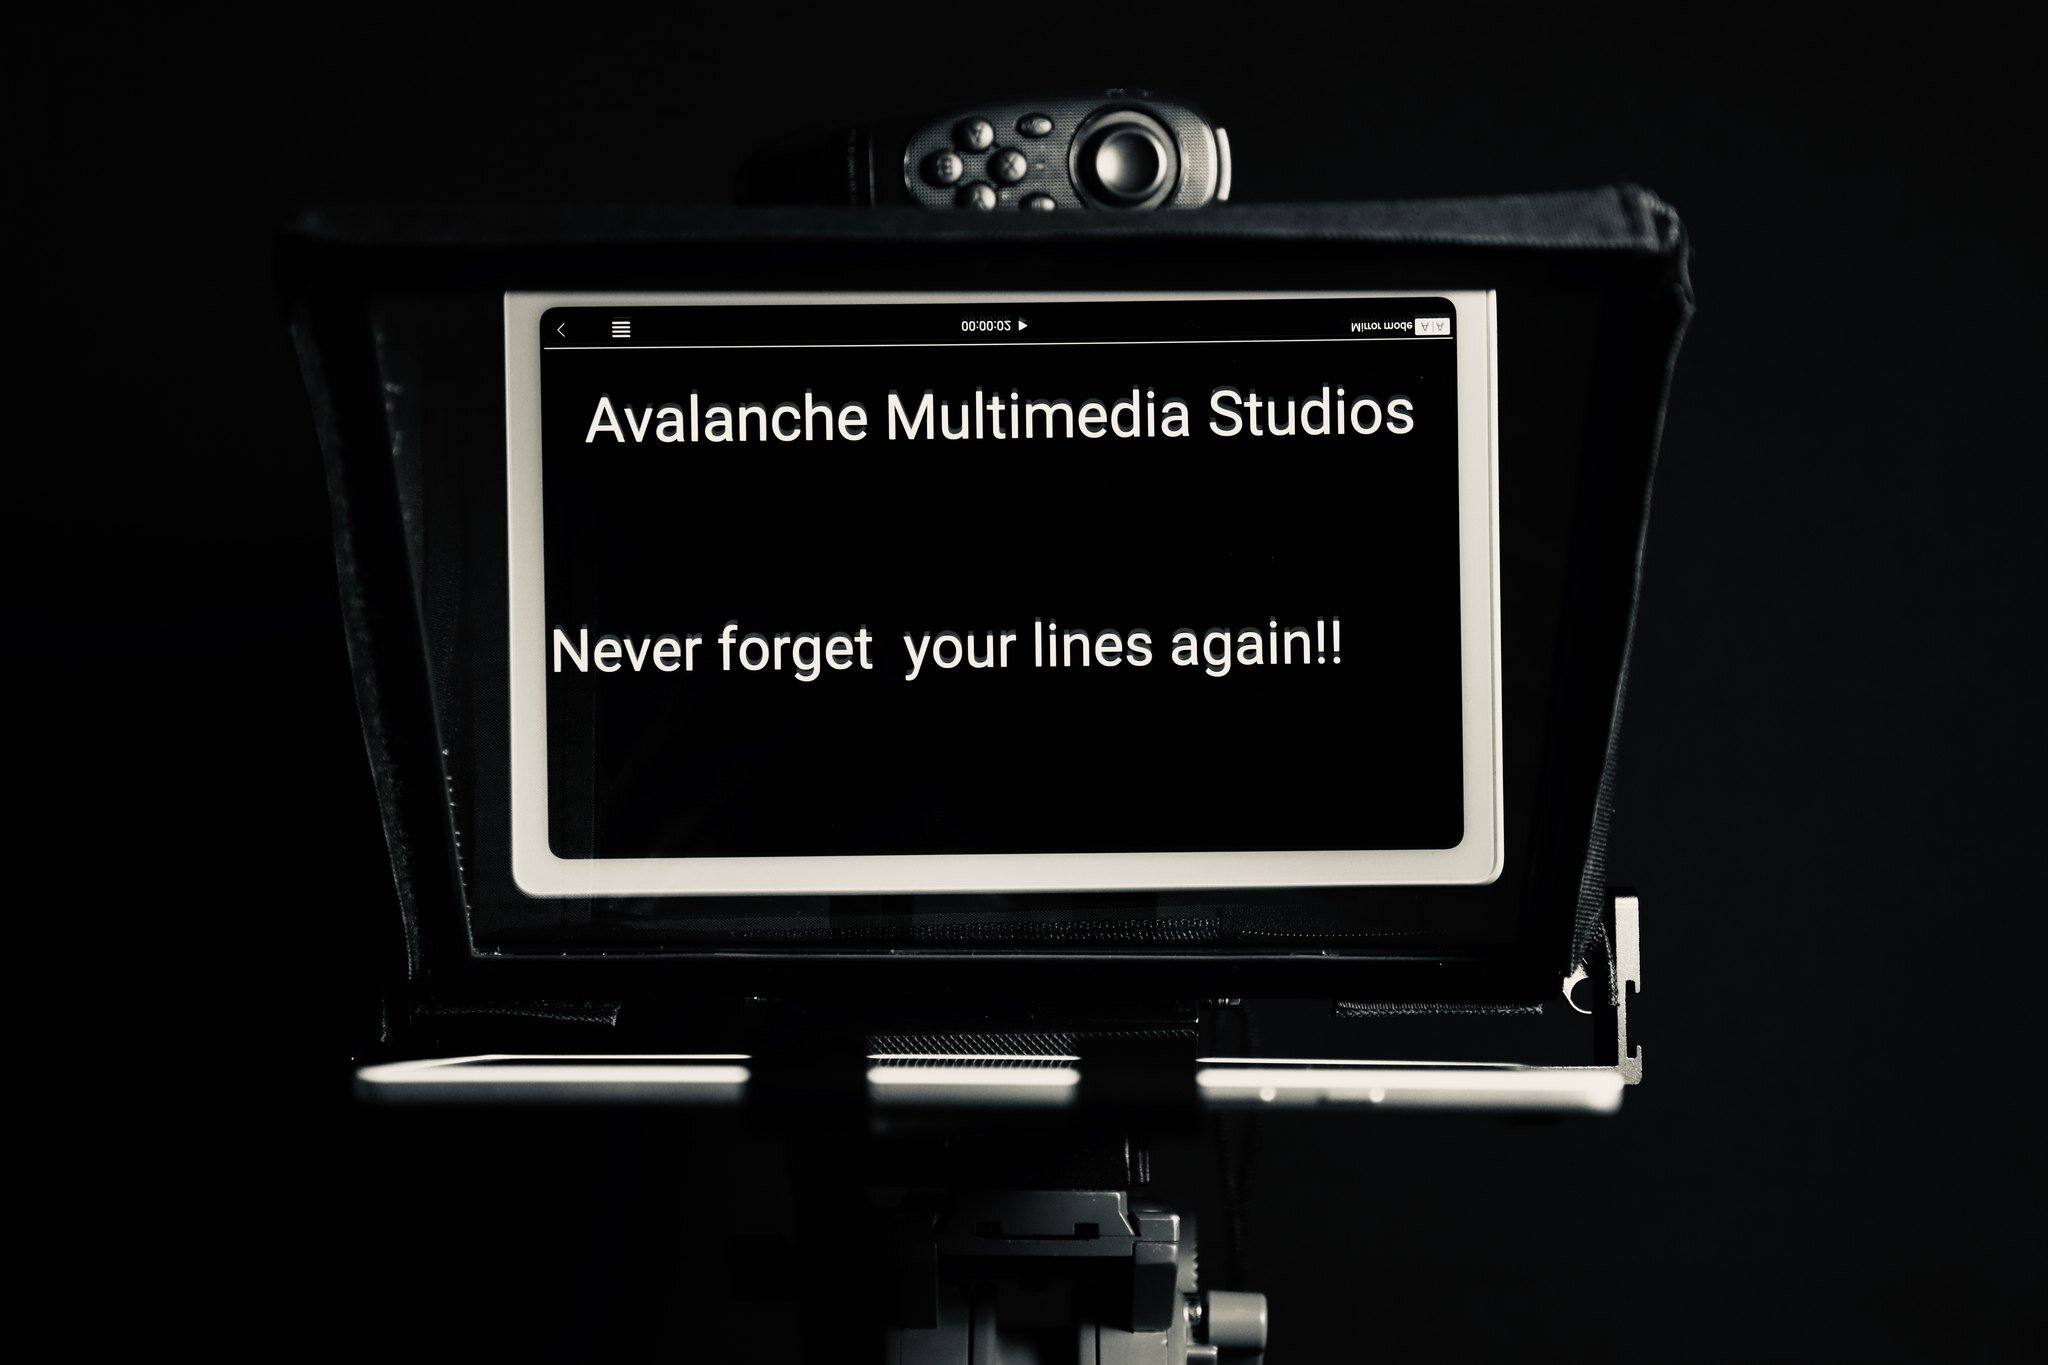 Never Forget Your Lines Again with our TelePrompter 🎥 📺 . For more info please visit avalanchemultimediastudios.com #avalanchemultimediastudios #corporatevideoproduction #corporatevideoproductionireland #corporatevideoproductionservices #irishcorpo